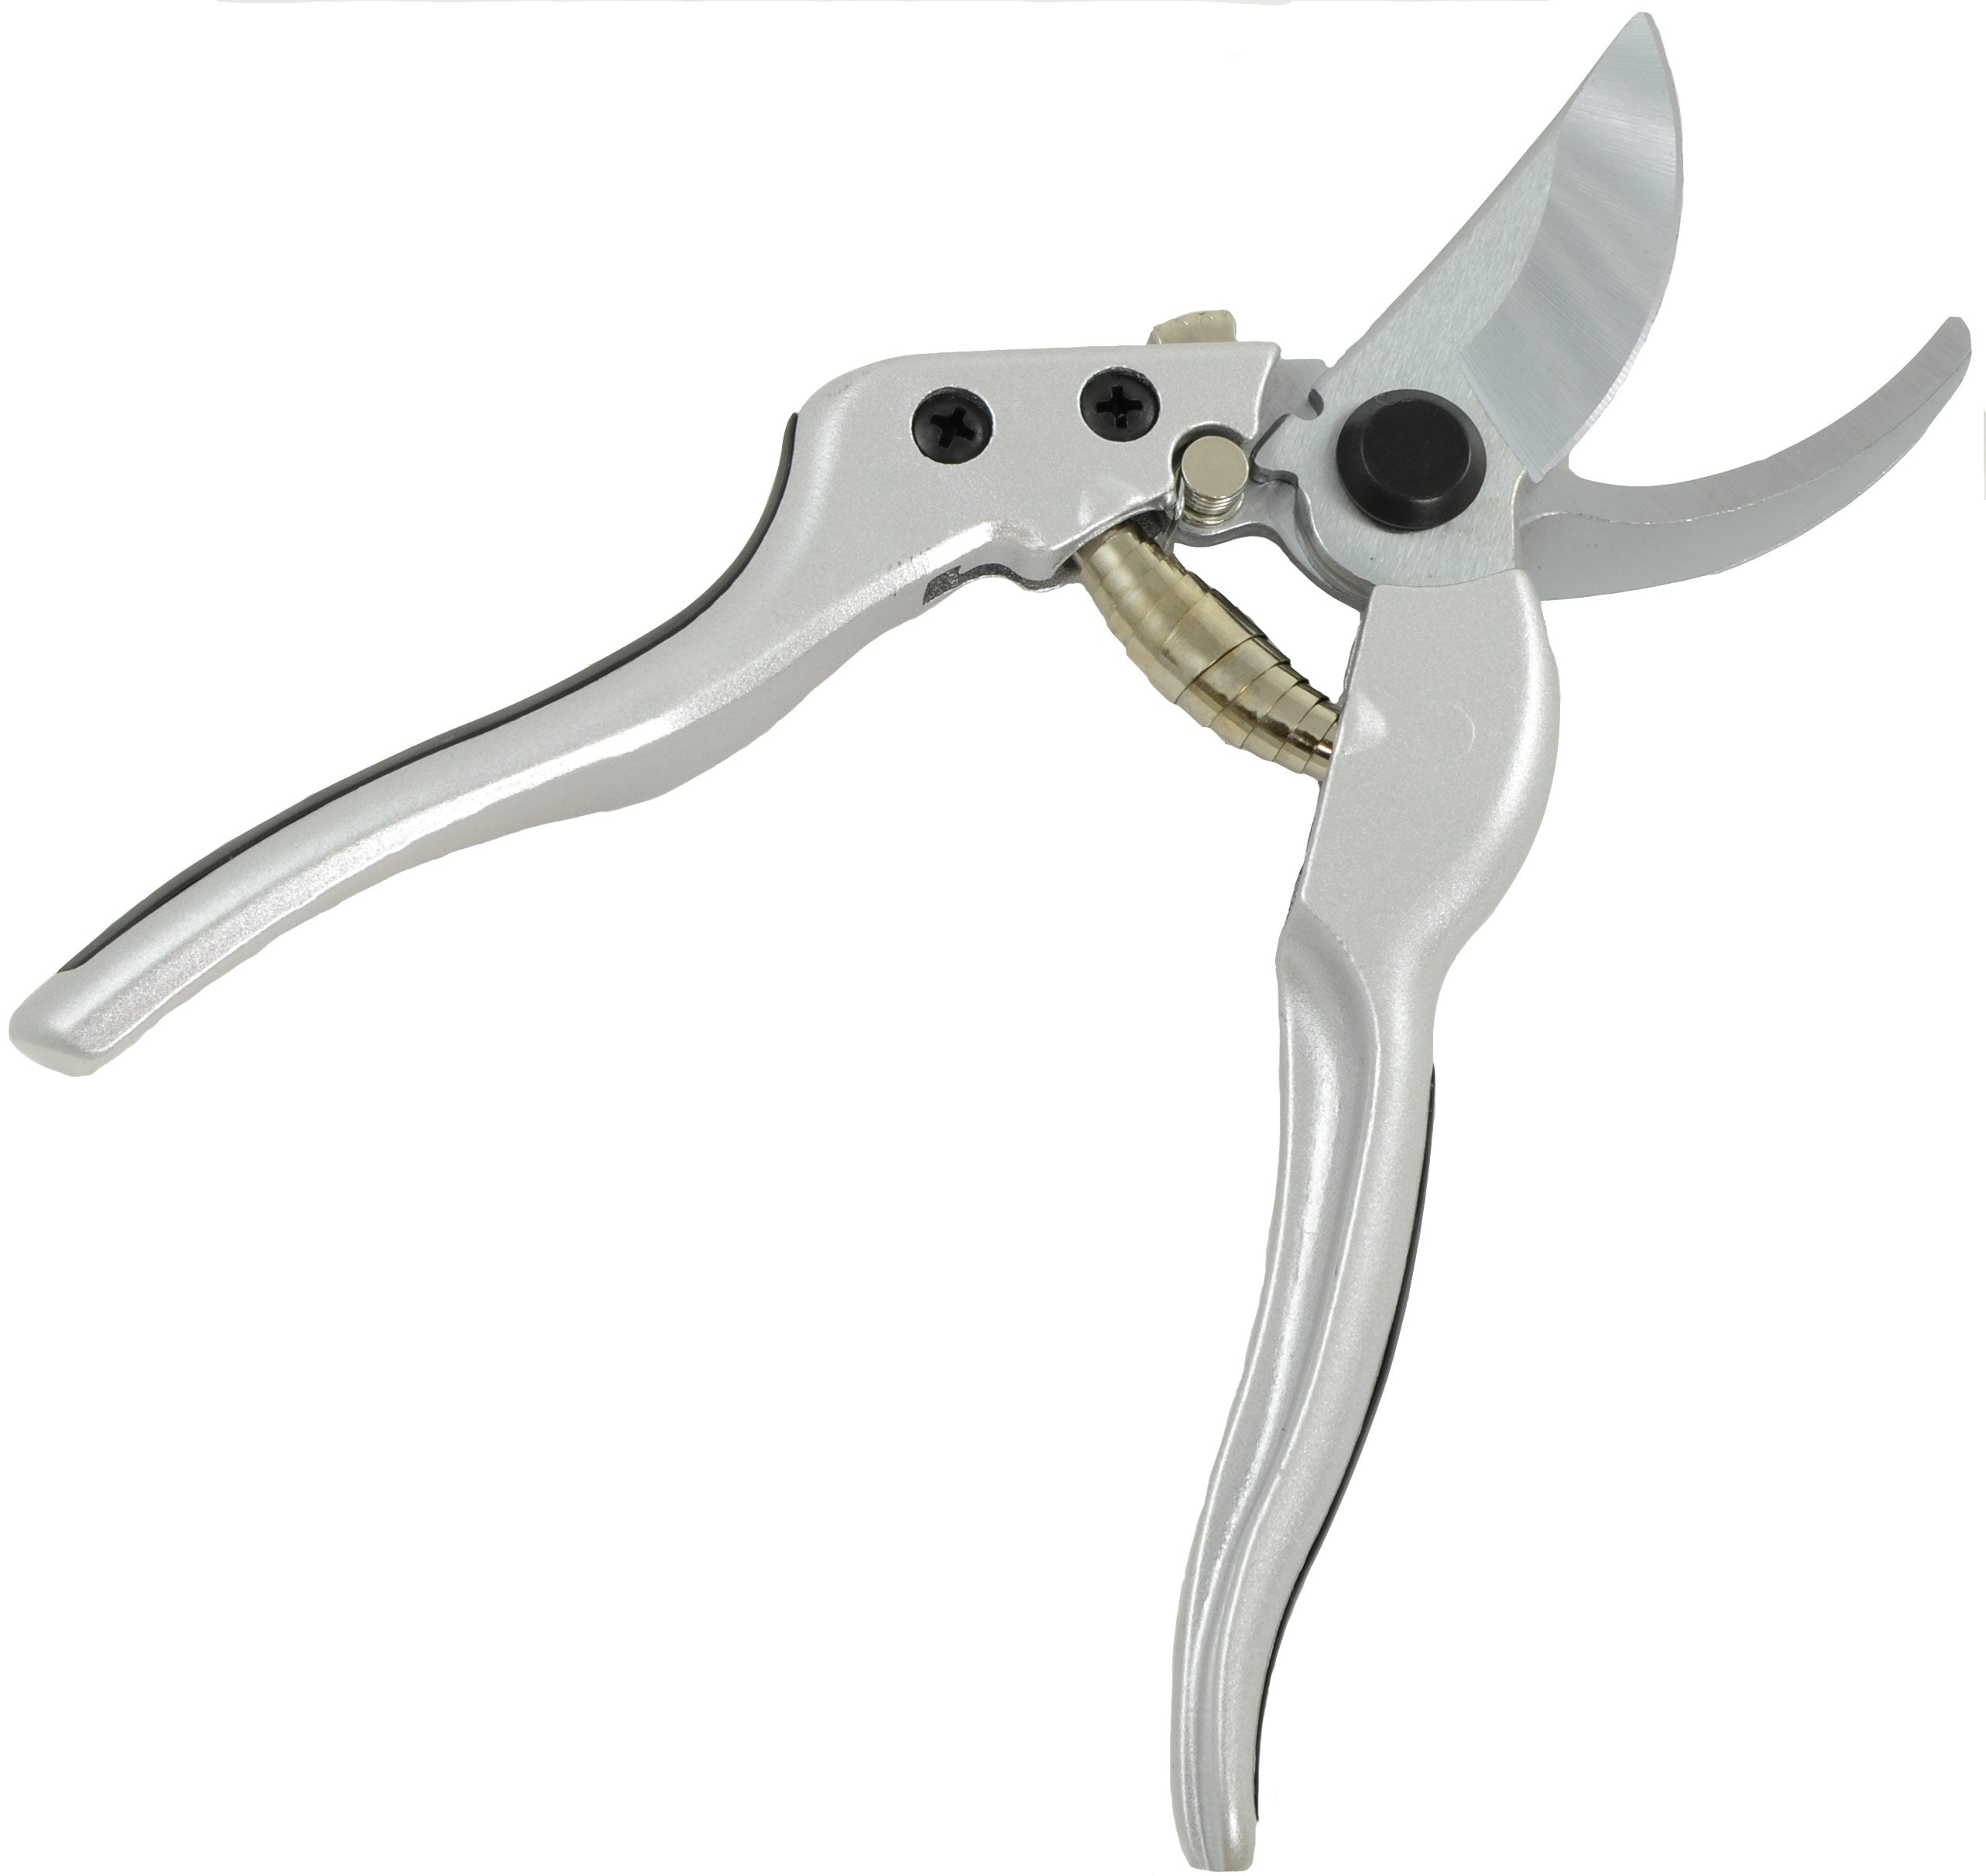 8.25" Metal Bypass Pruning Shears Floral Cutter